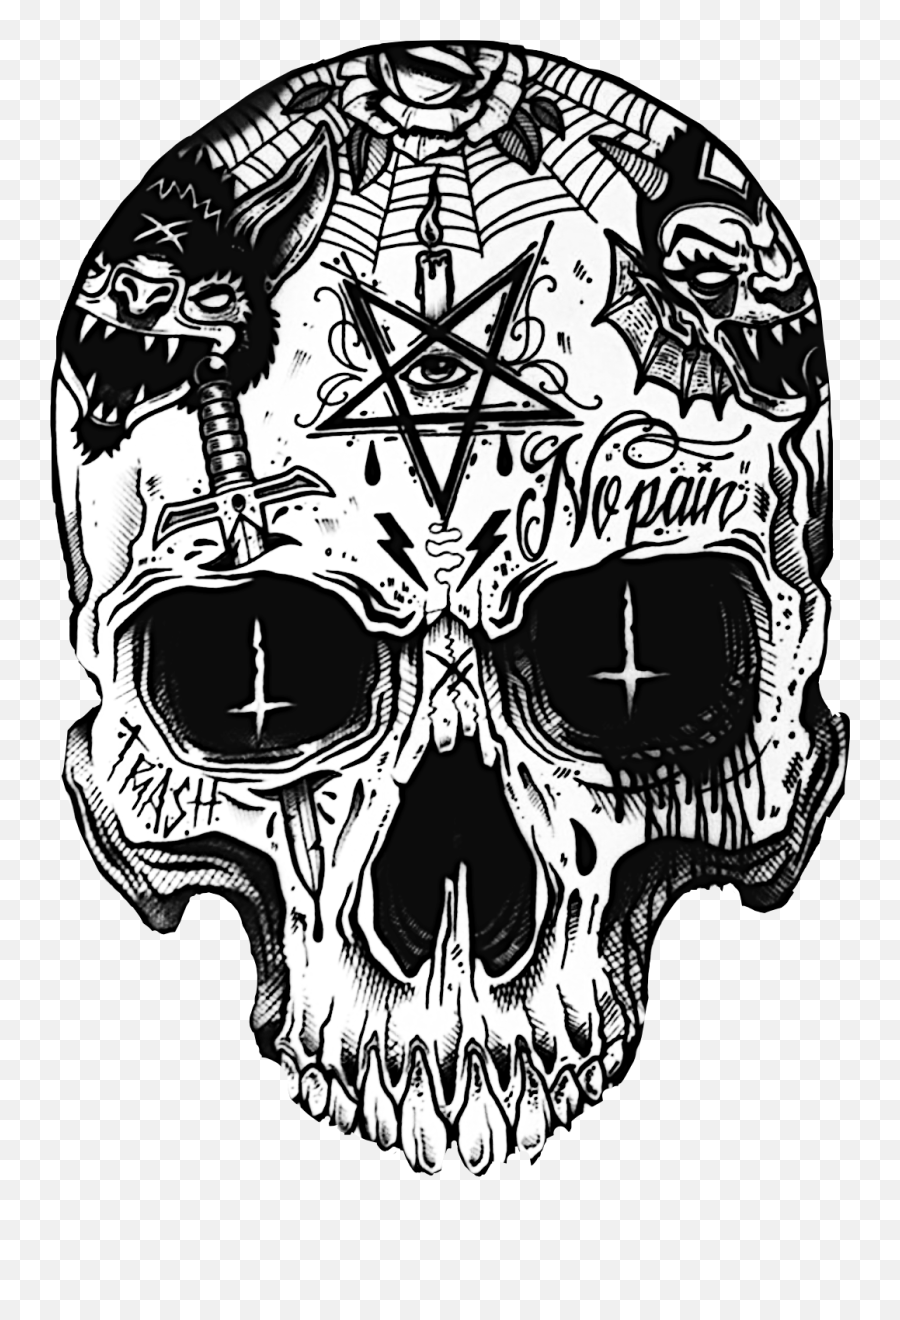 The Most Edited Pentagrama Picsart - Skull With Pentagram Tattoo Emoji,Emoji Pentagrama